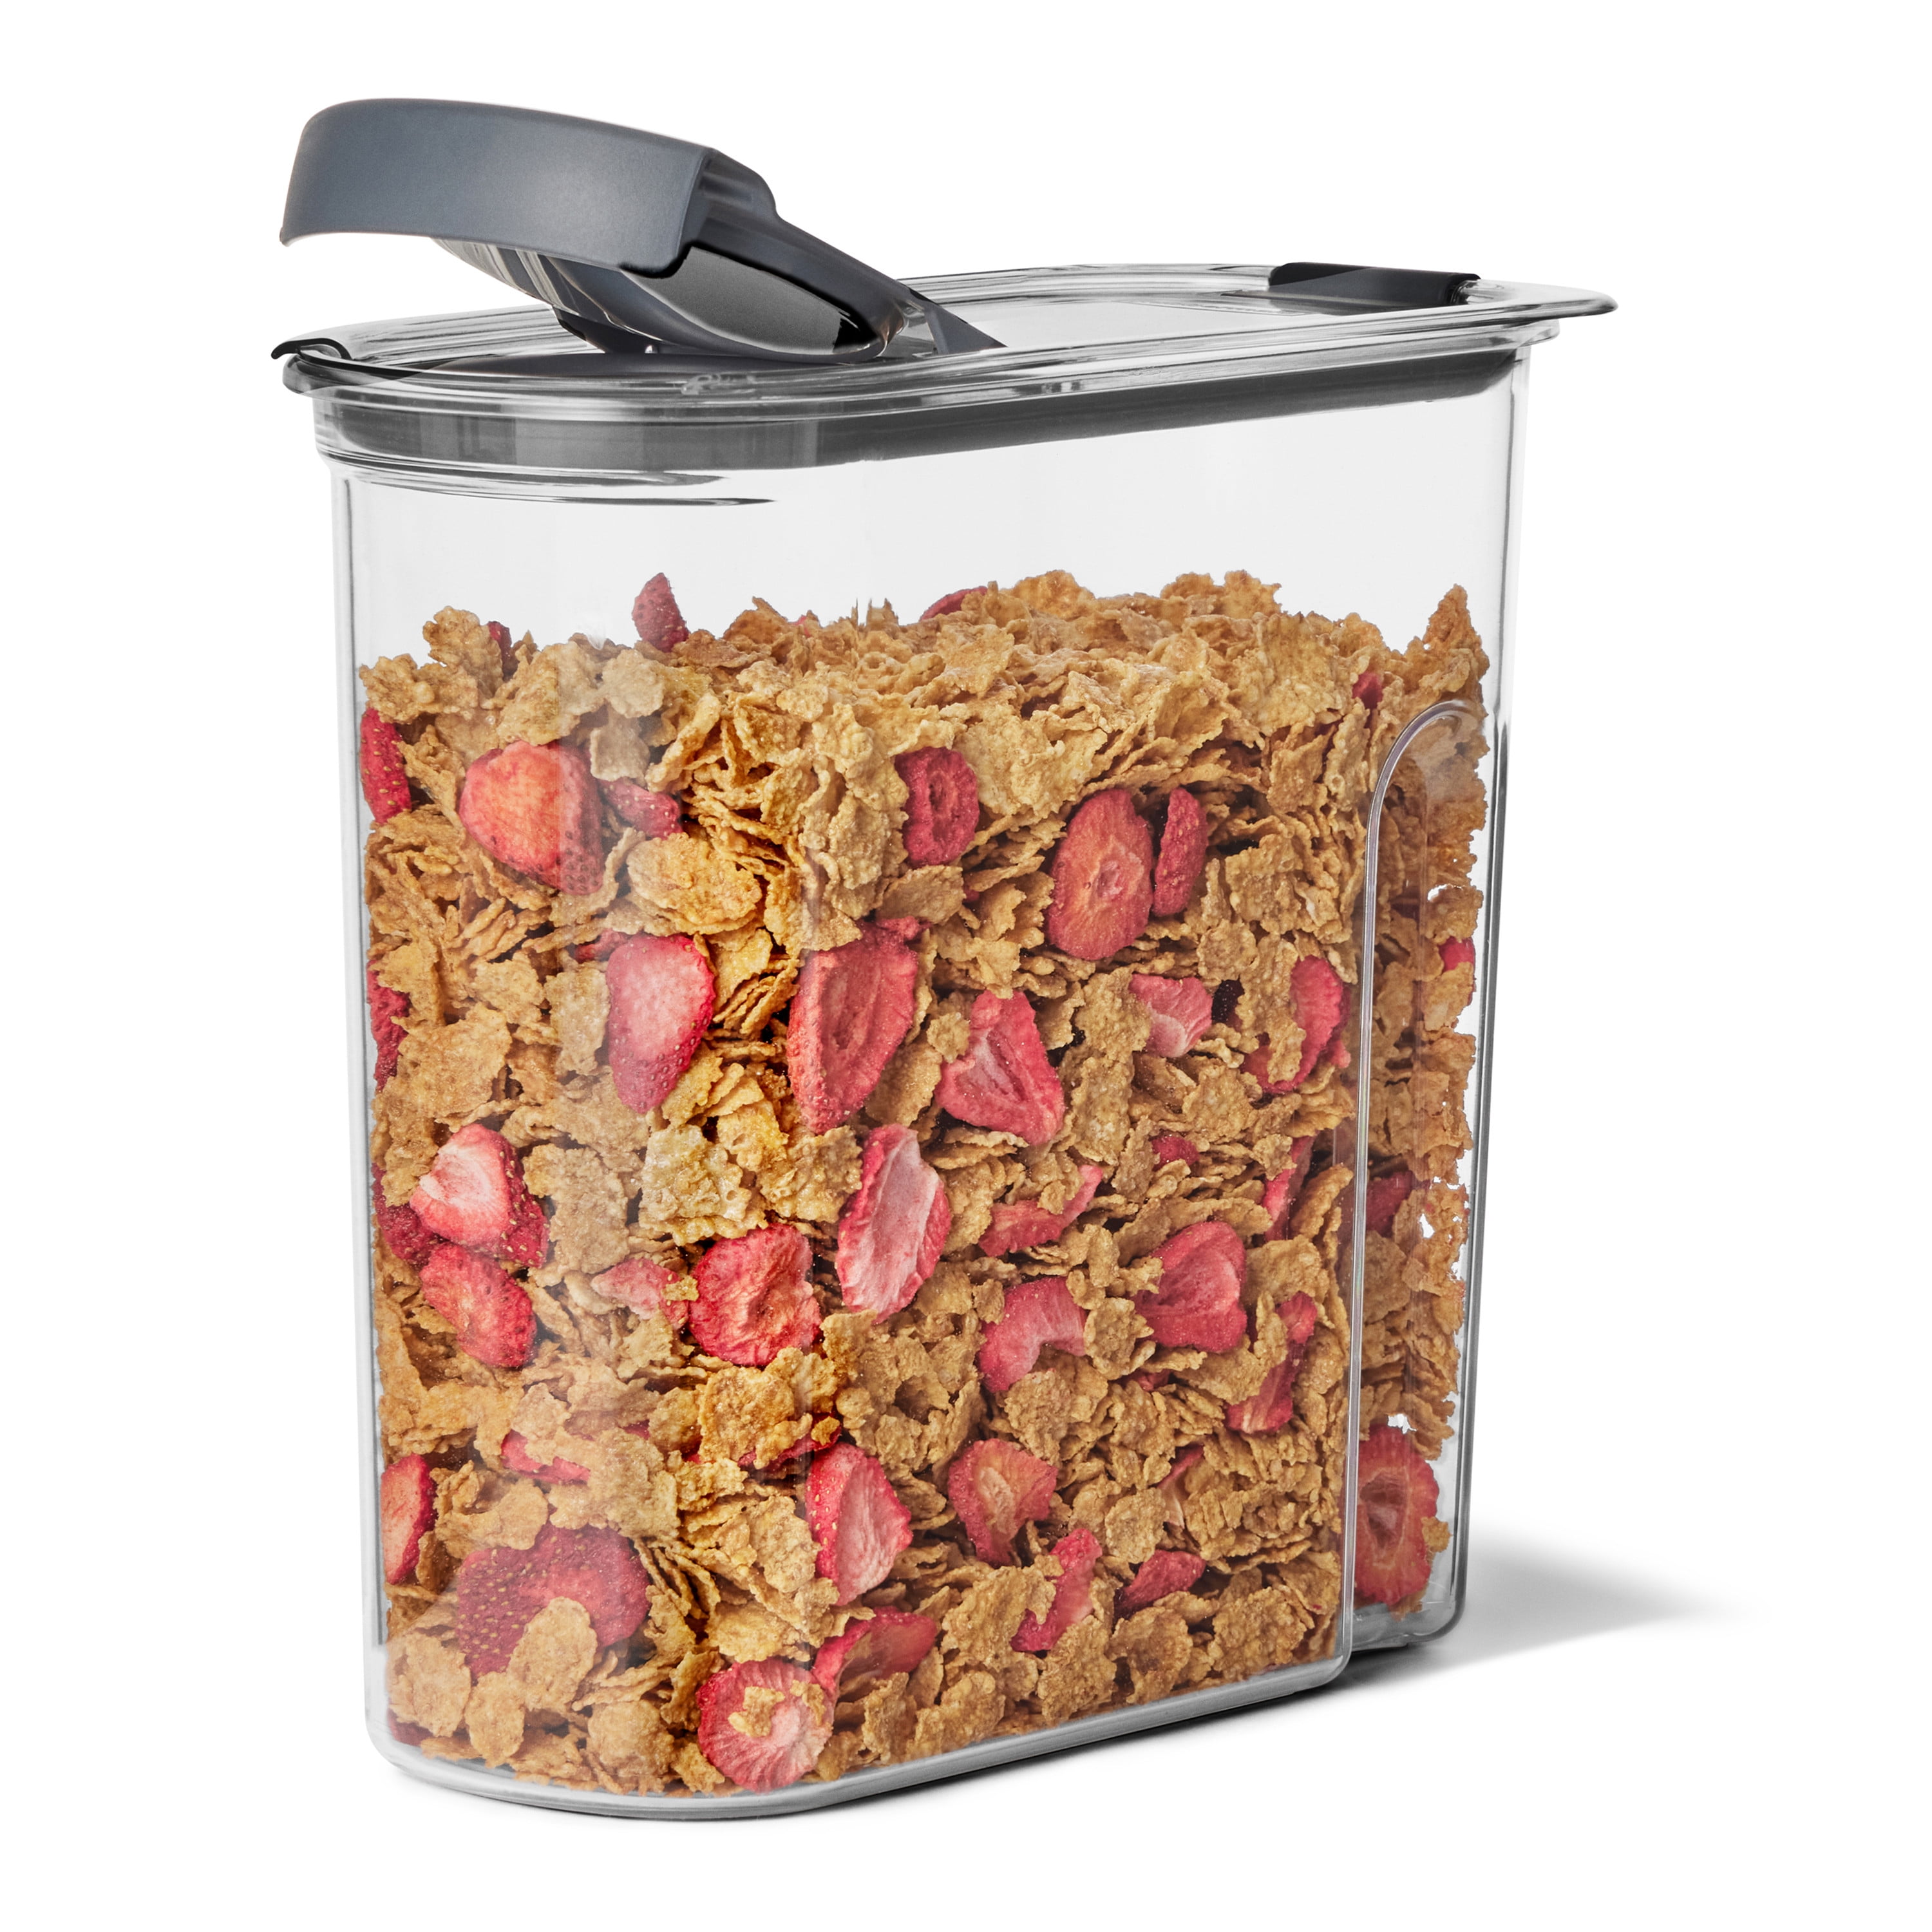 Free 2-day shipping. Buy Rubbermaid Cereal Keepers (3 Pack) - Assorted  Colors at Walmart.com